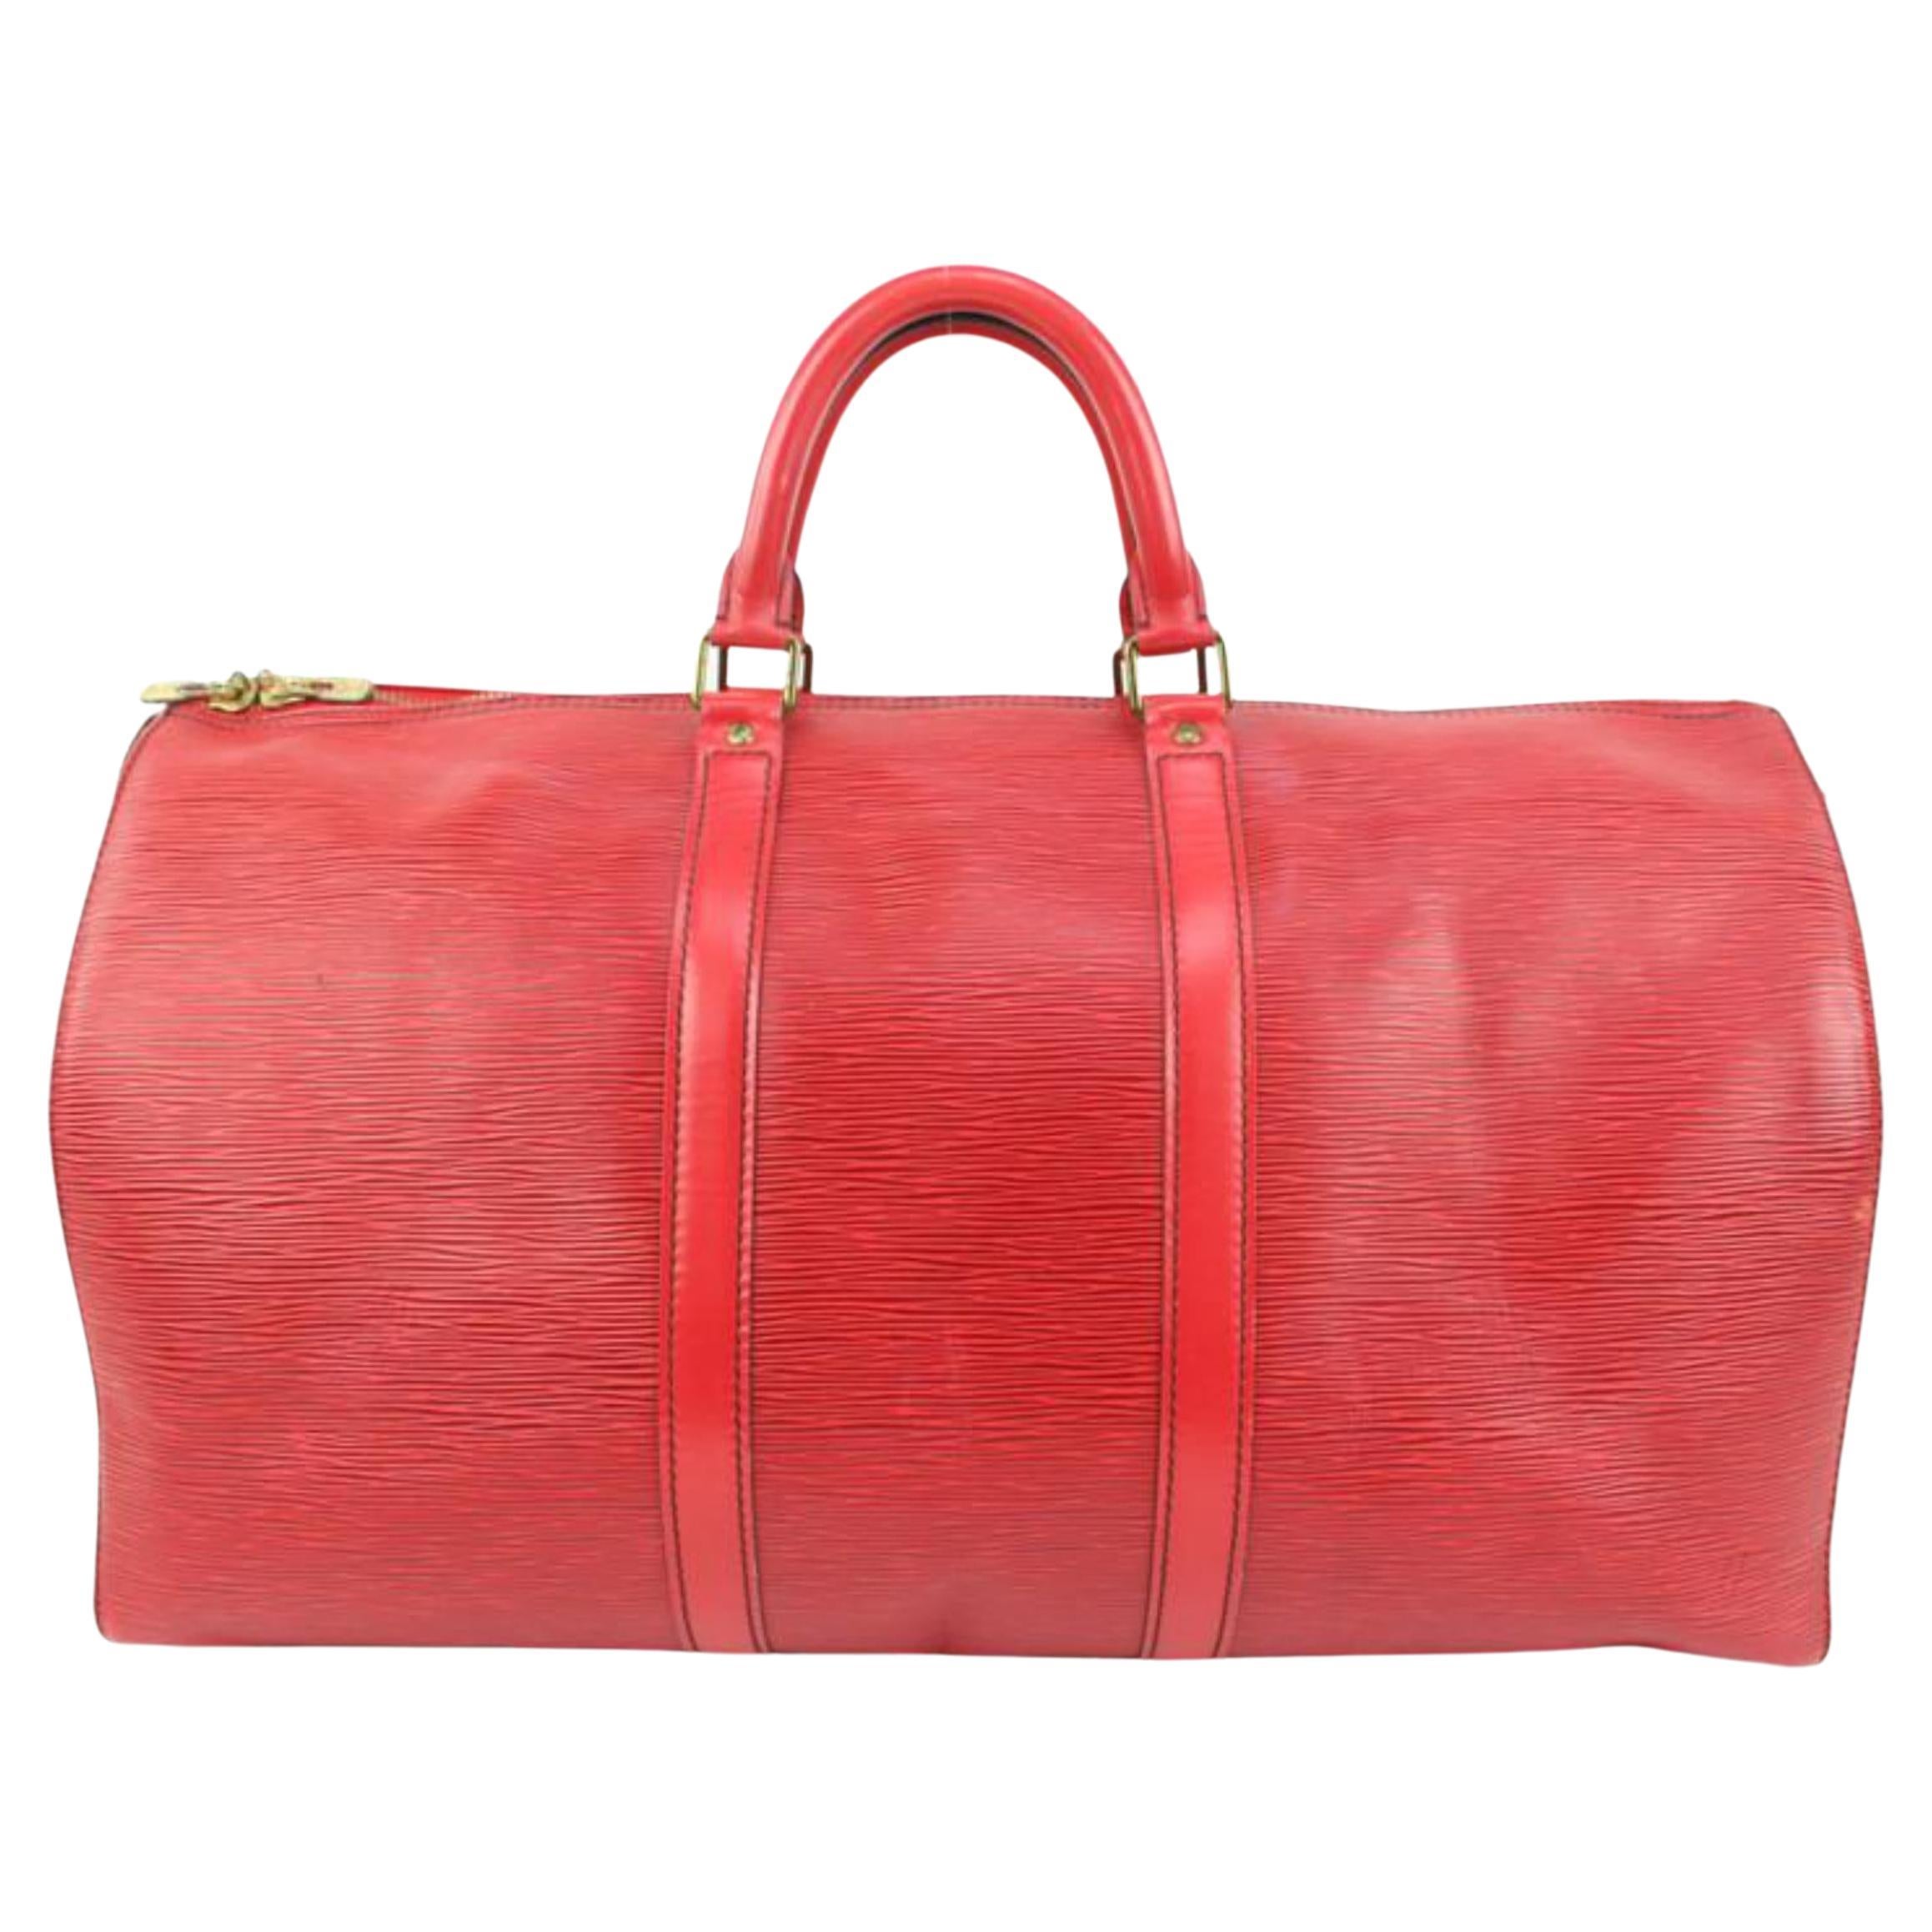 Louis Vuitton Red Epi Leather Keepall 50 Duffle Bag 89lk328s